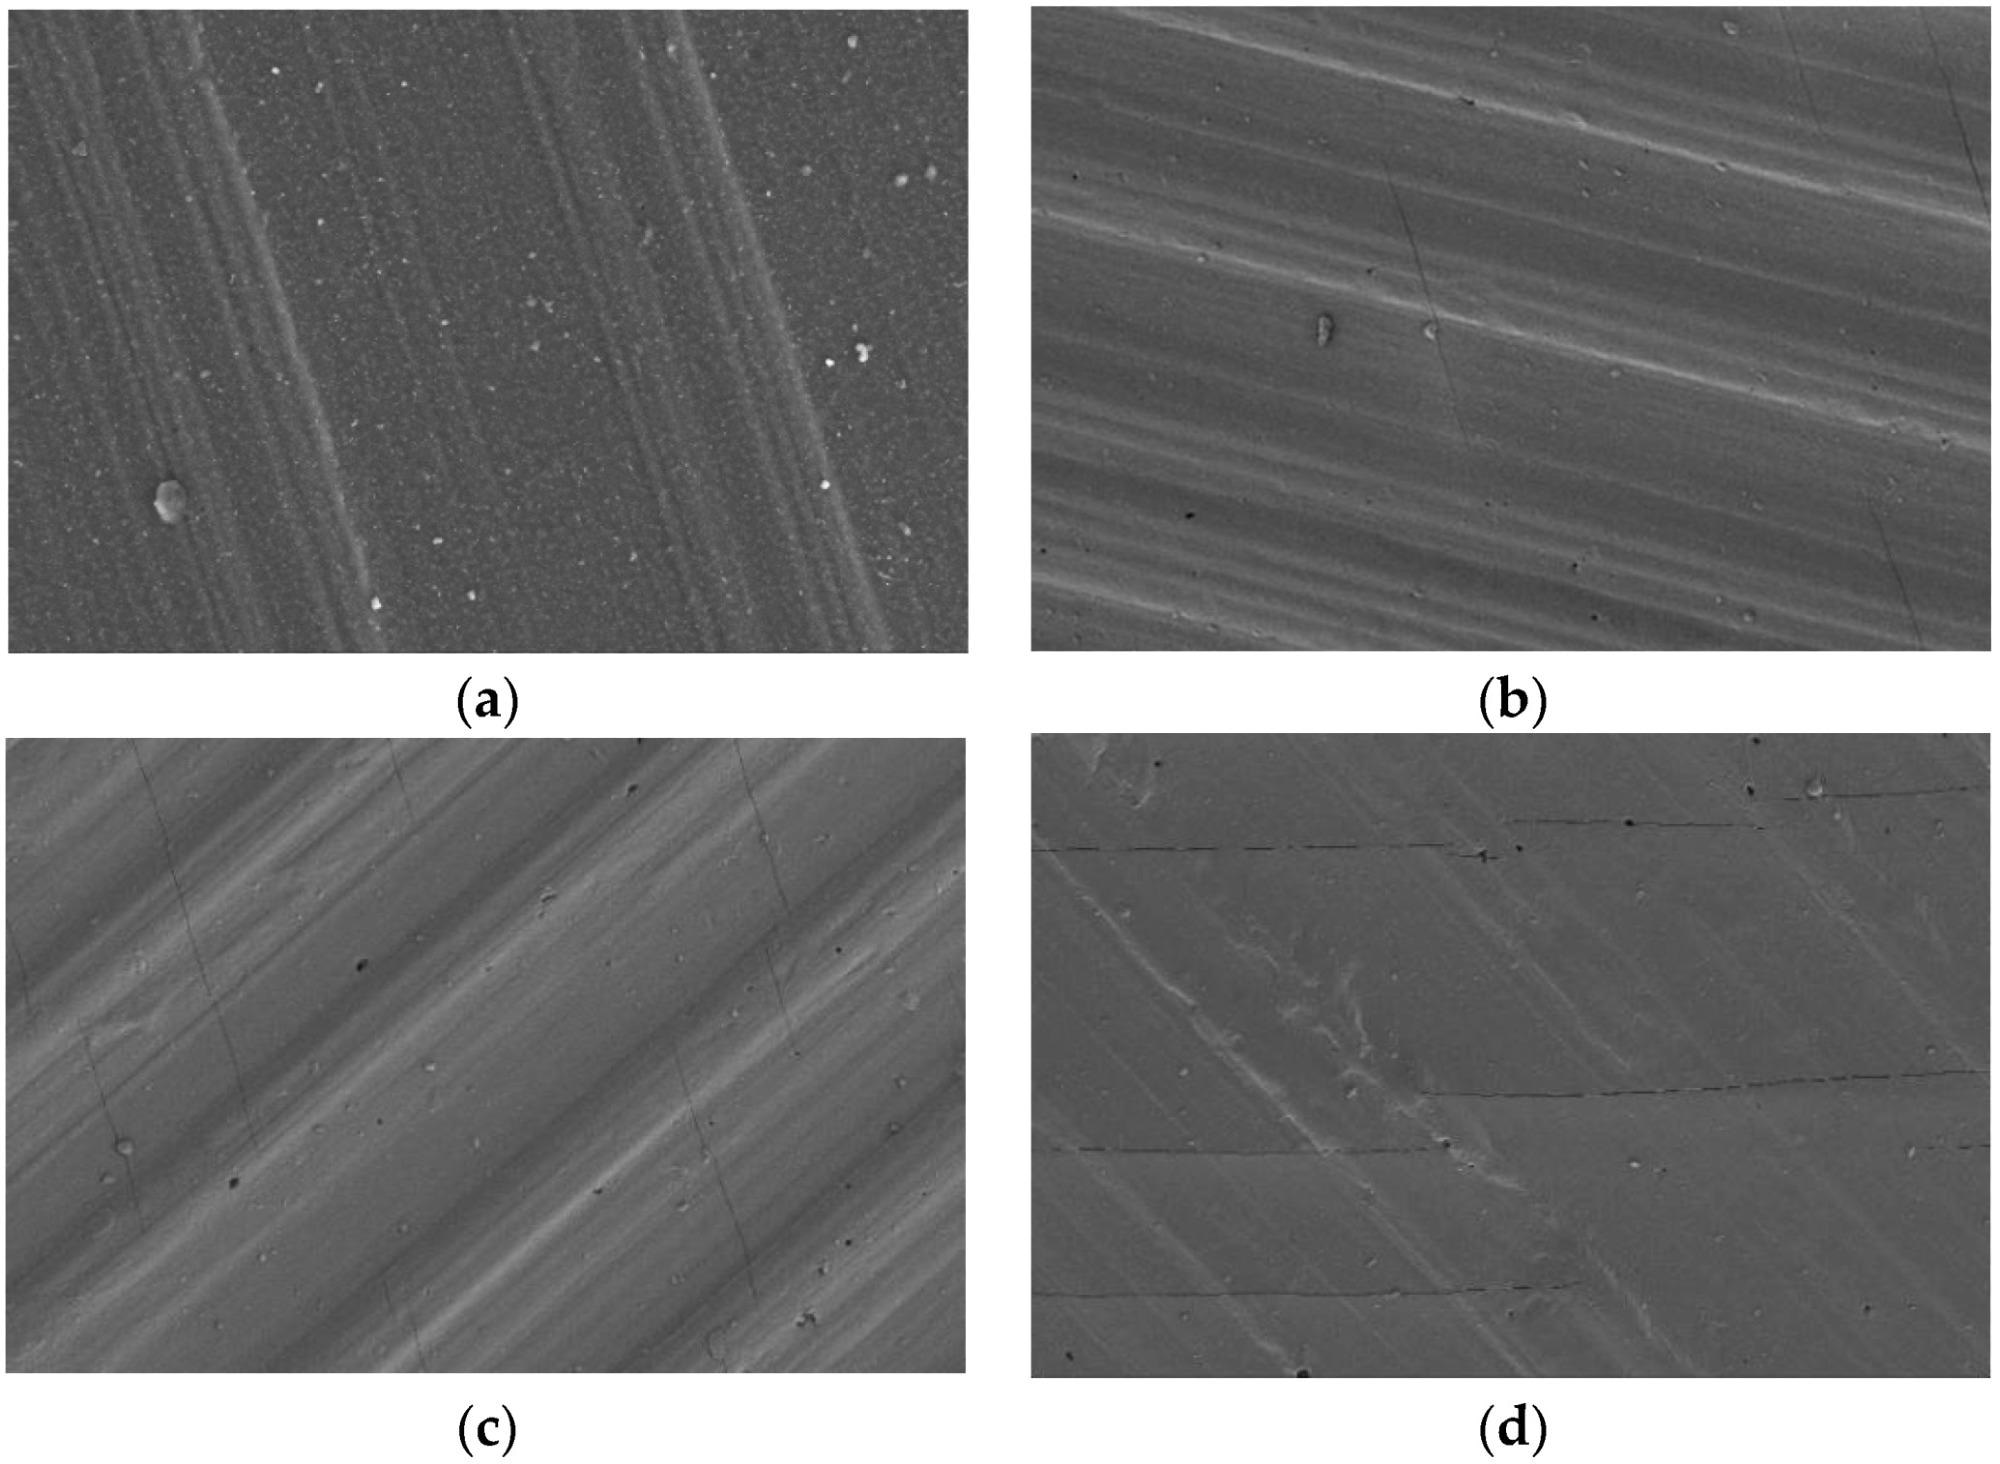 Surface morphology changes with low temperature freezing time. (a) Freezing 0 h, (b) Freezing 300 h, (c) Freezing 750 h, (d) Freezing 1050 h.